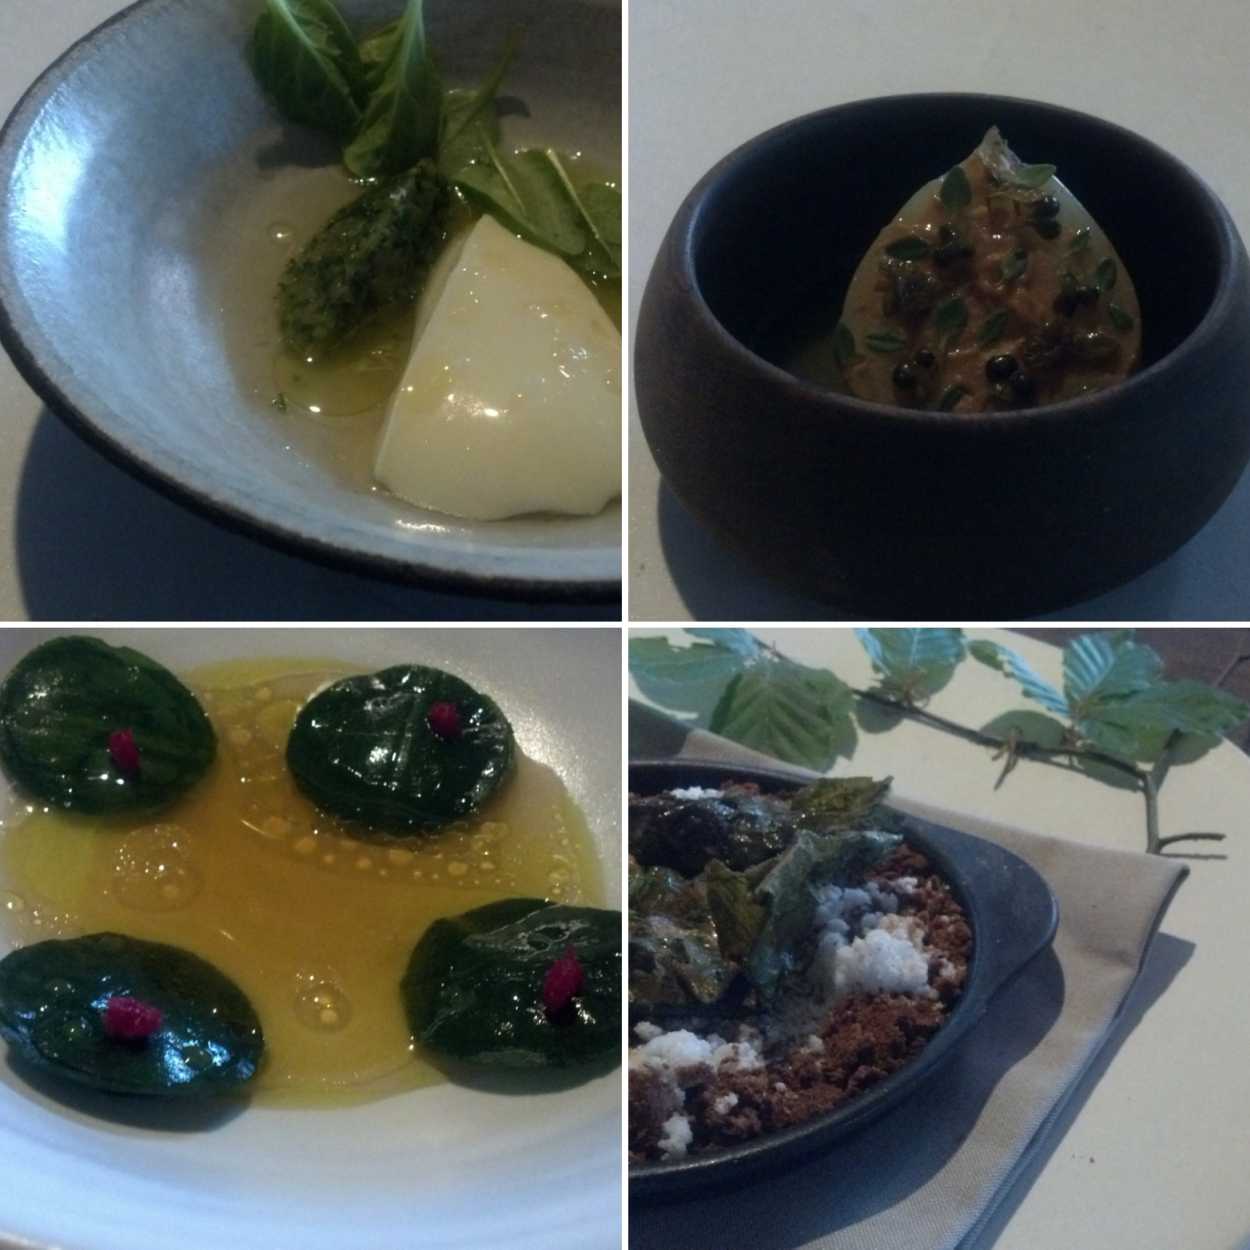 Photos of the second four dishes at noma 1.0